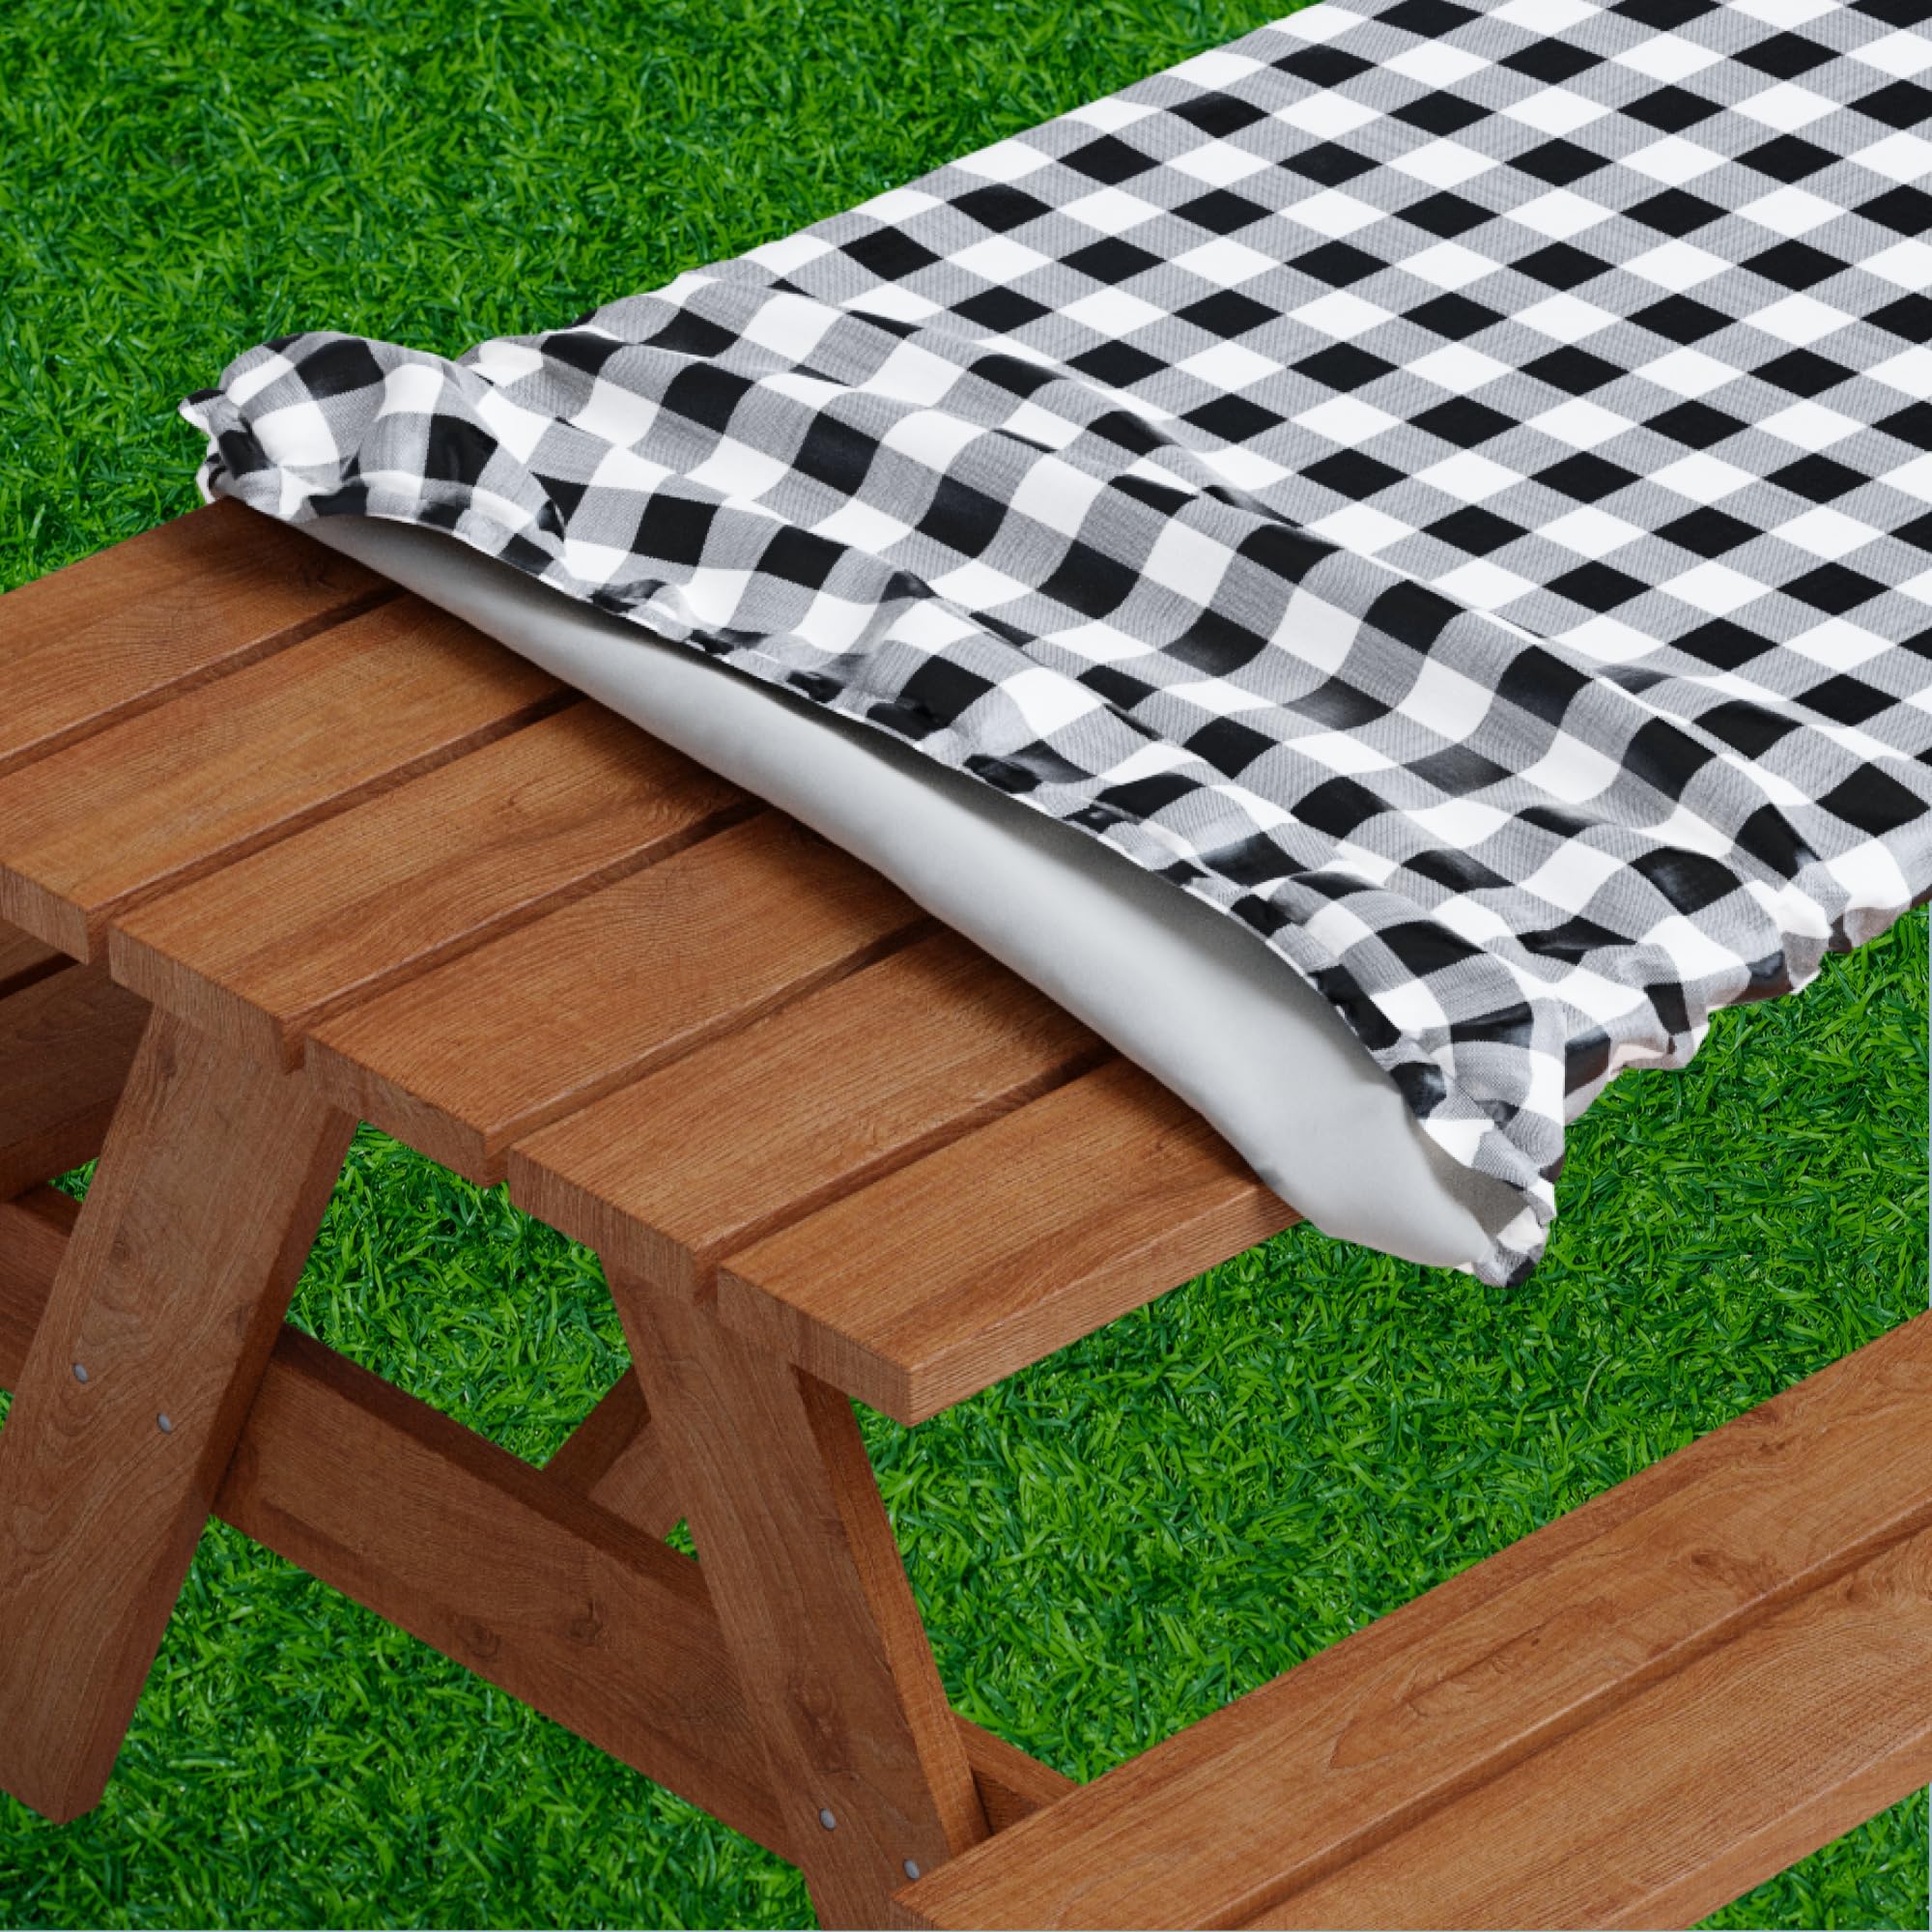 Sorfey Vinyl Picnic Table Fitted Tablecloth Cover, Checkered Design, Flannel Backed Lining, 24 Inch by 48 Inch Blue  - Very Good